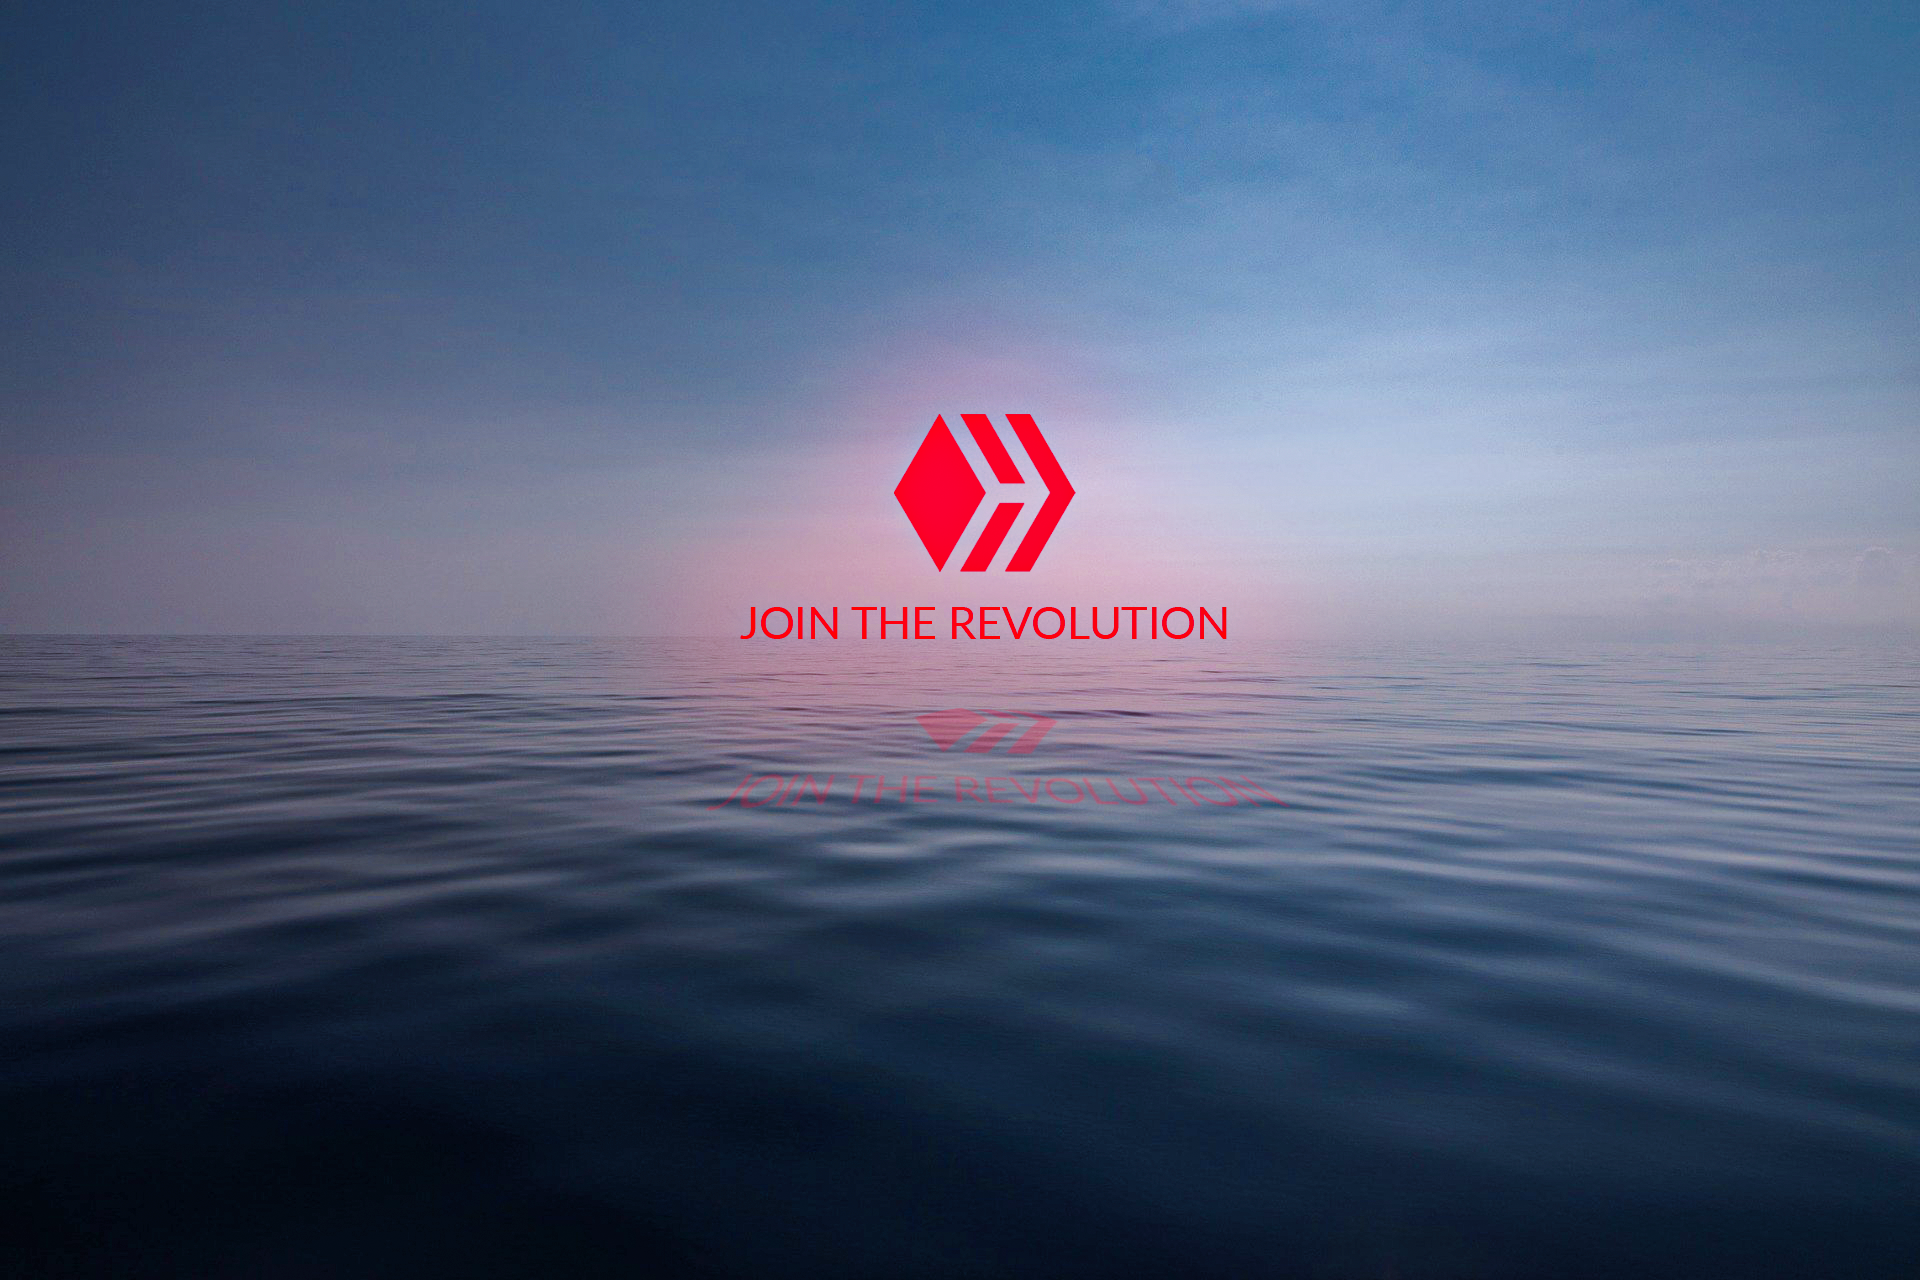 Join the Revolution by @thepeakstudio